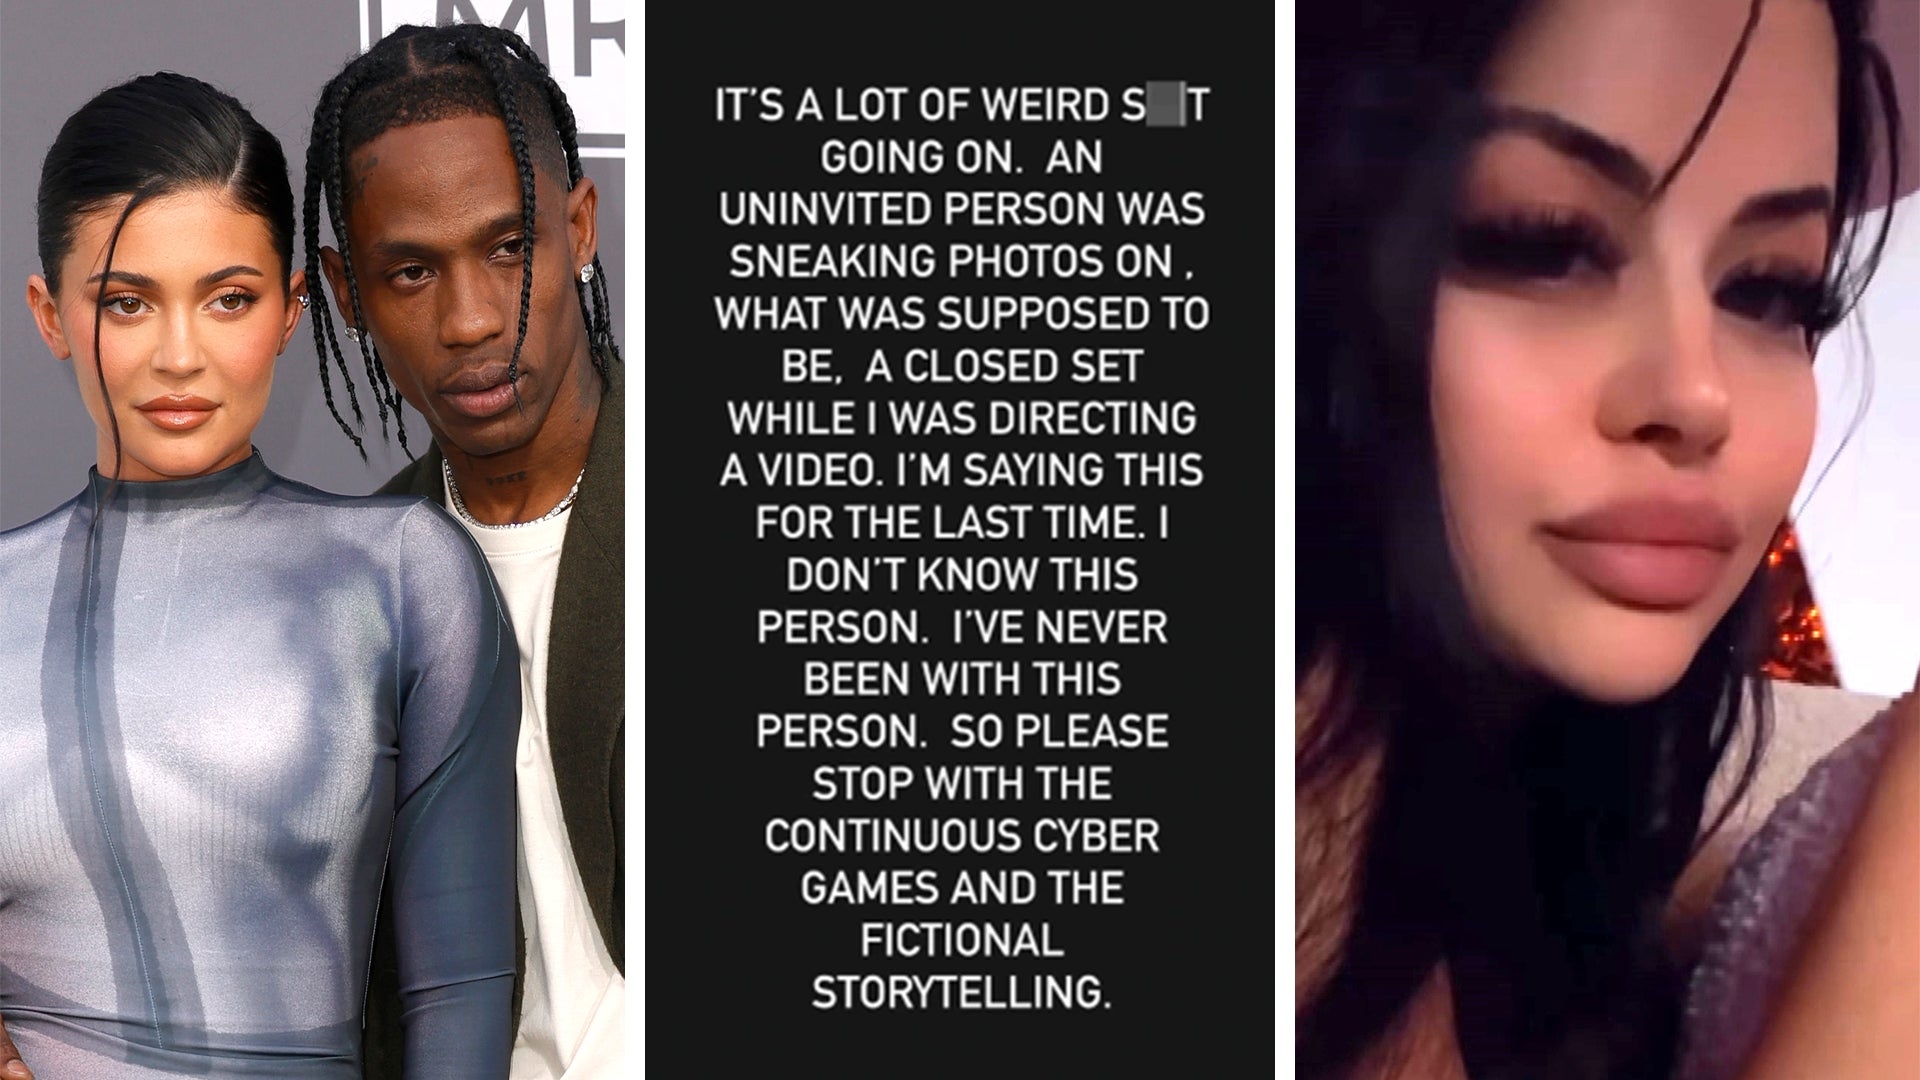 Kylie Jenner throws jabs at ex Travis Scott on social media- and